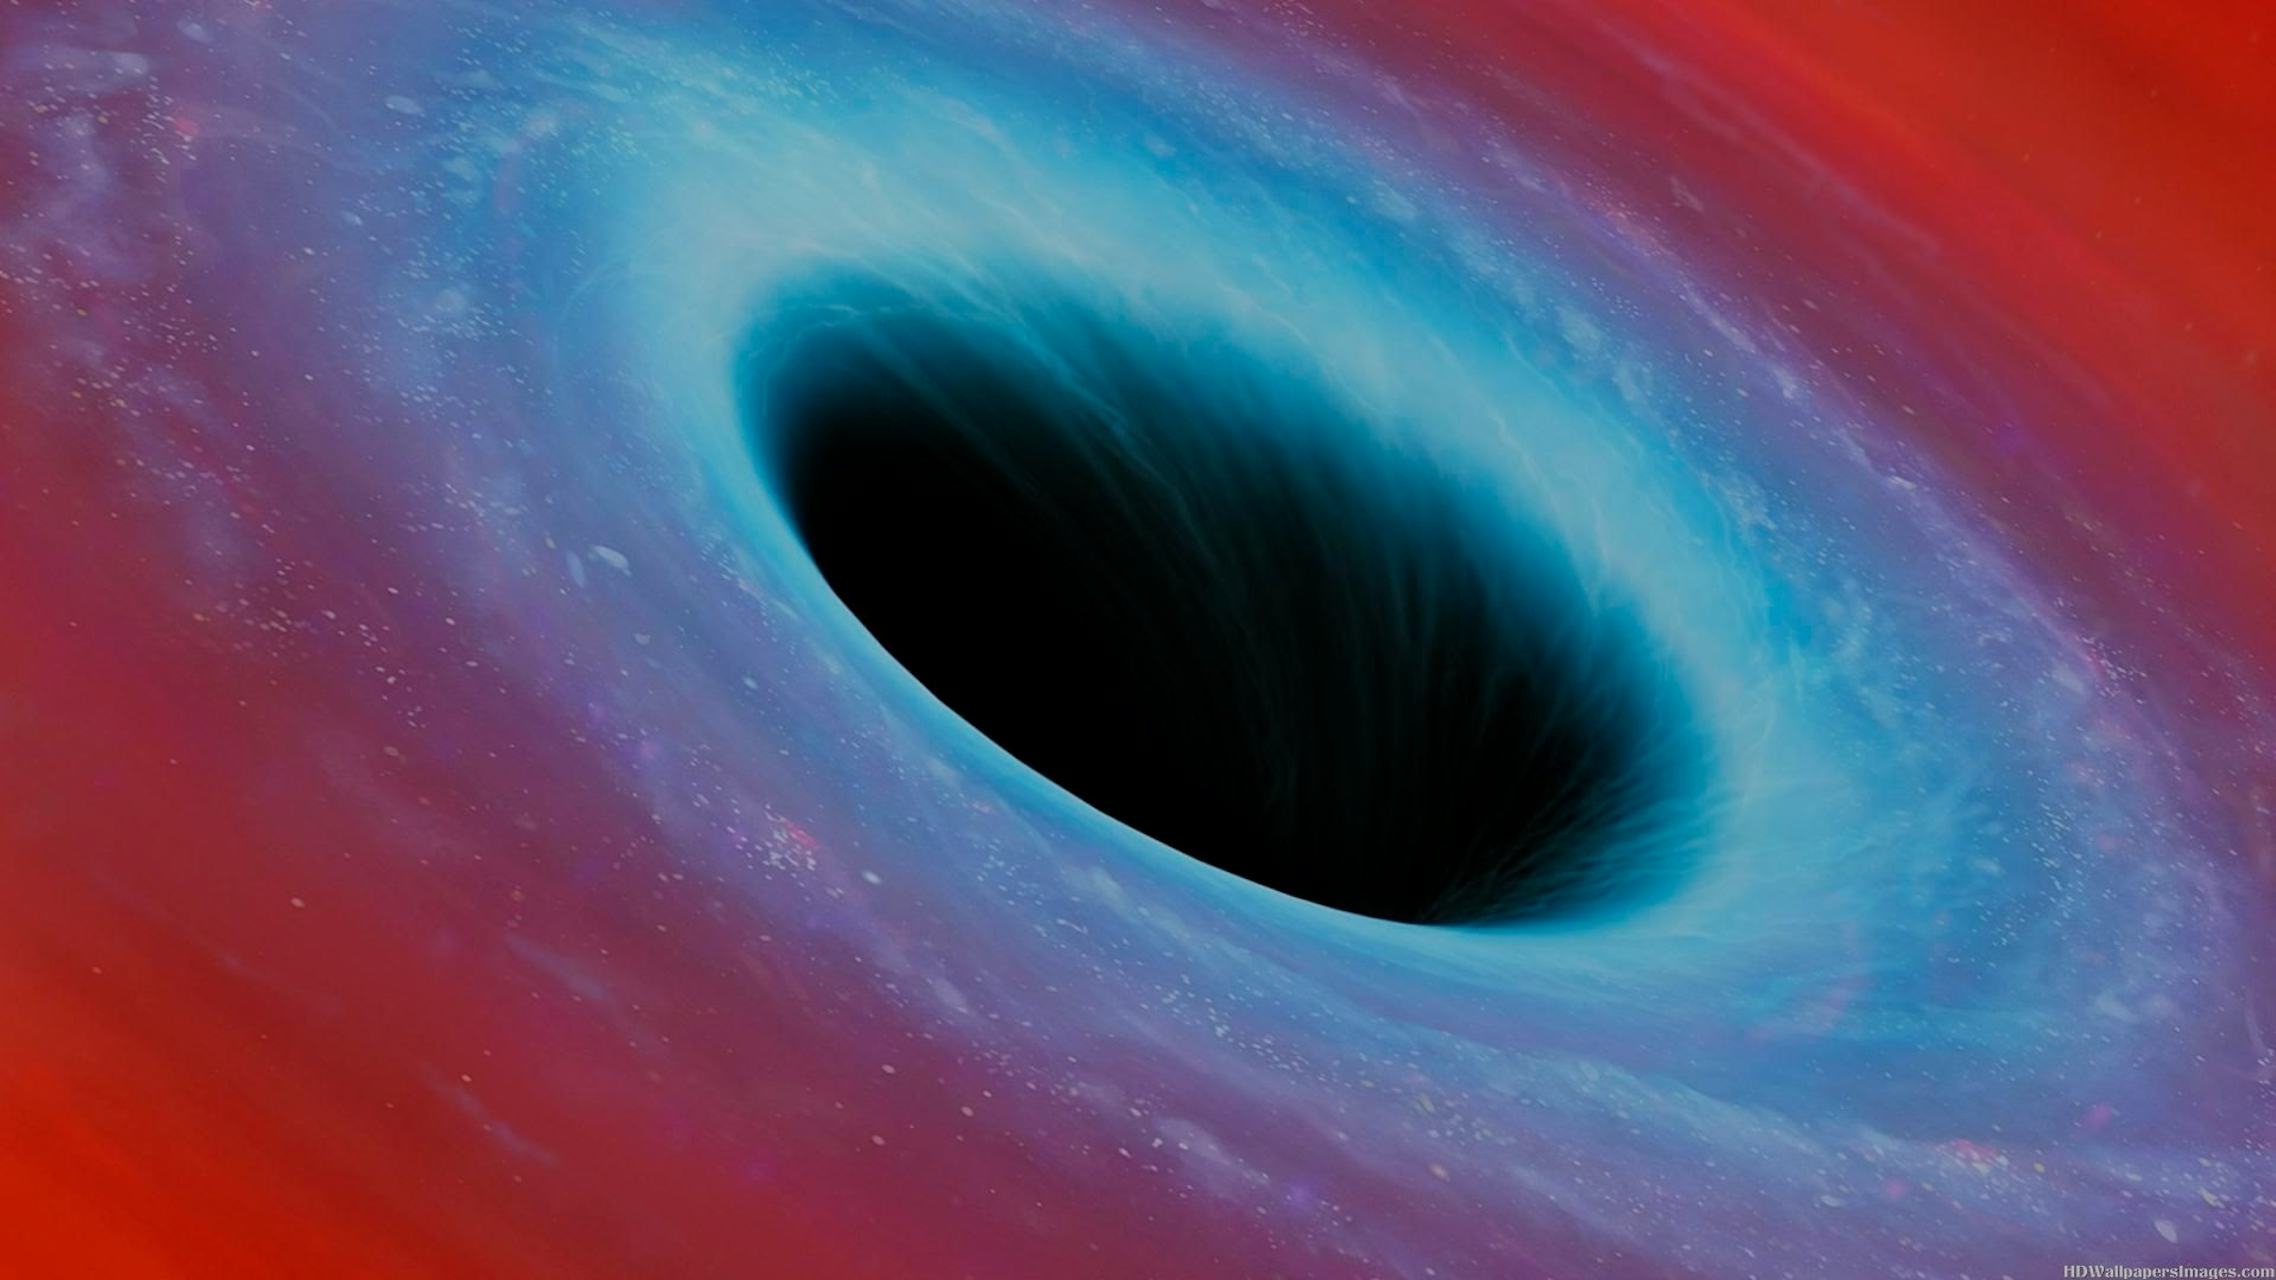 Are Black Holes Actually Nothing but Two Dimensions?